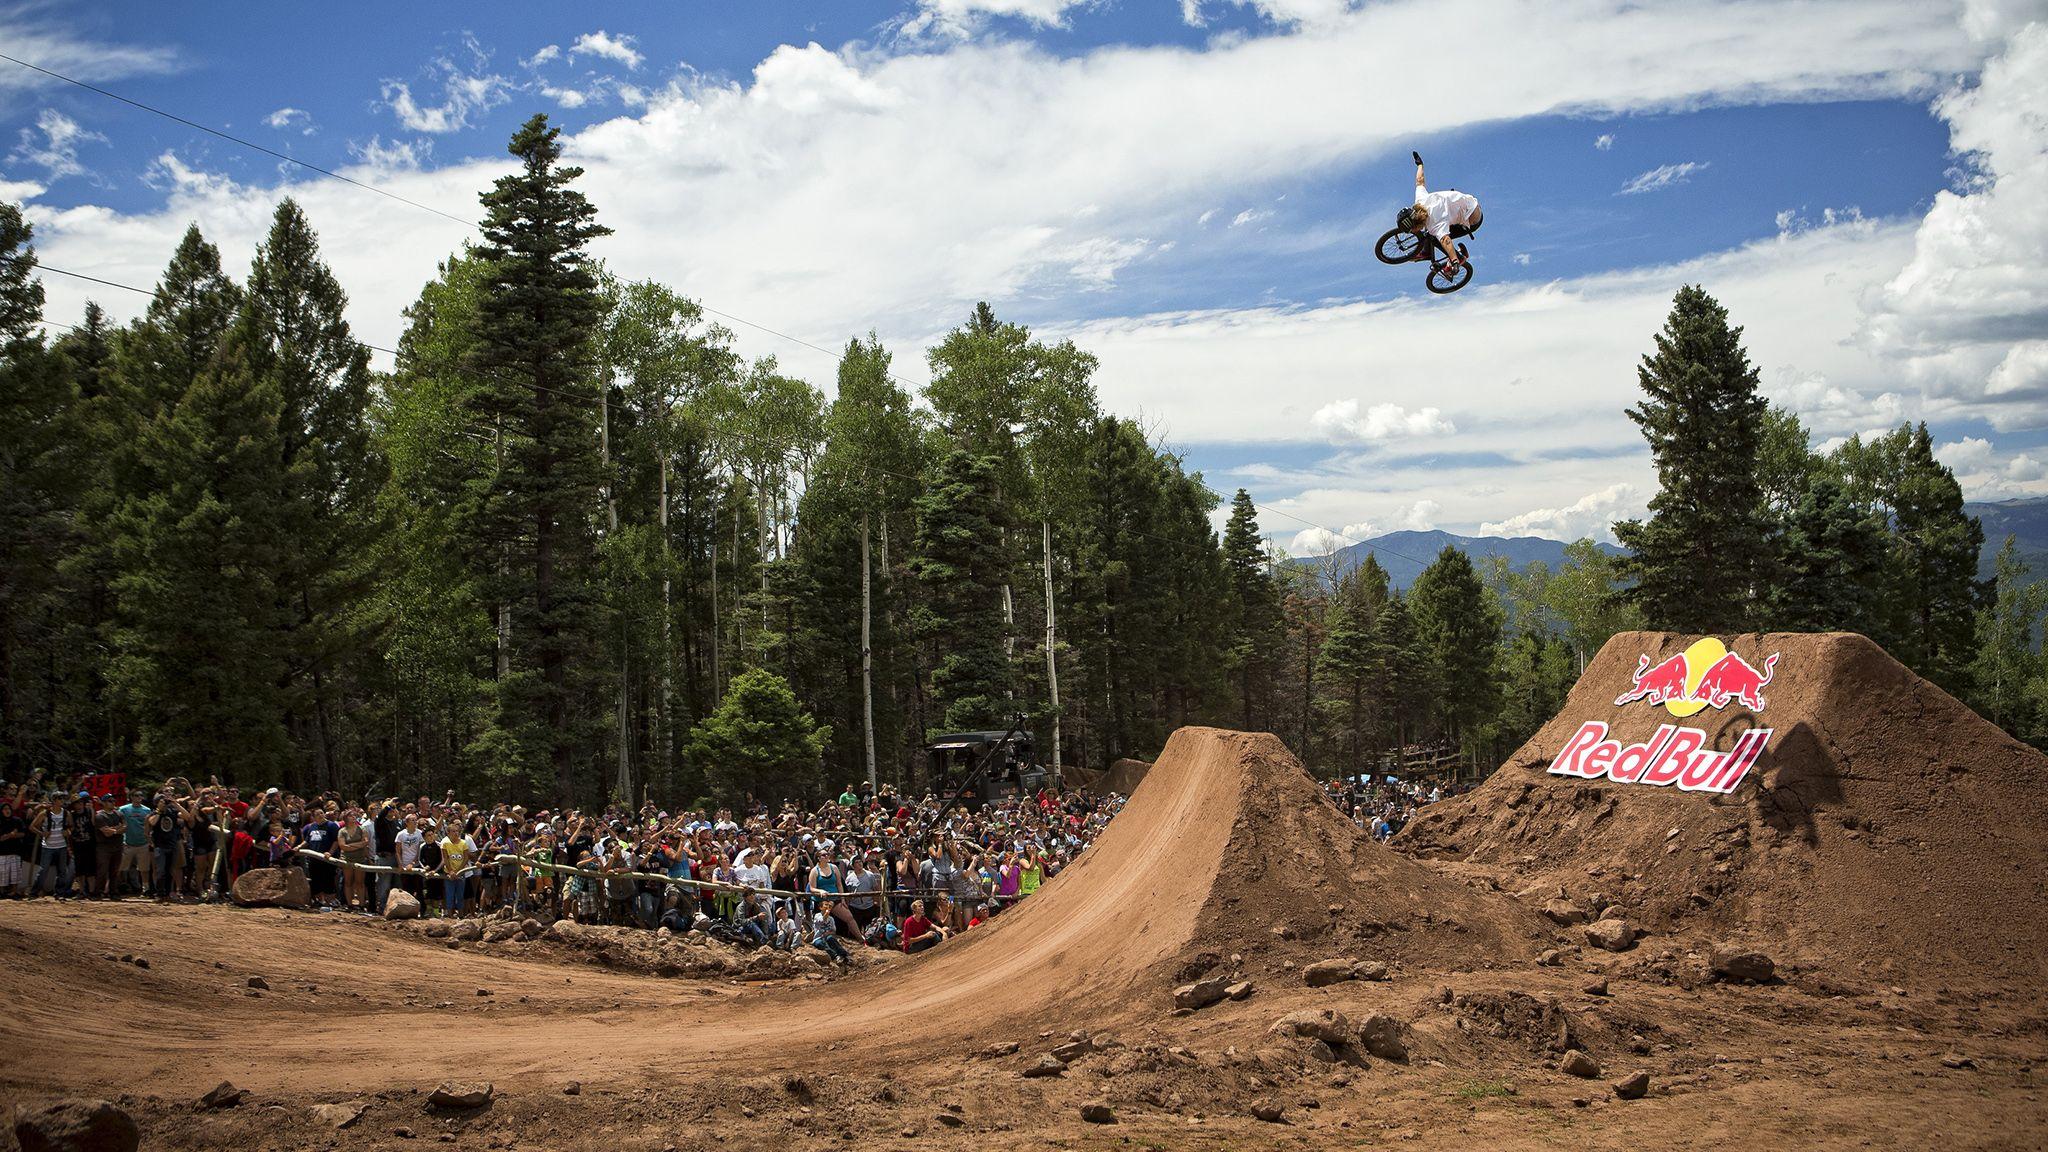 Gallery - Red Bull Dreamline 2013 BMX dirt competition